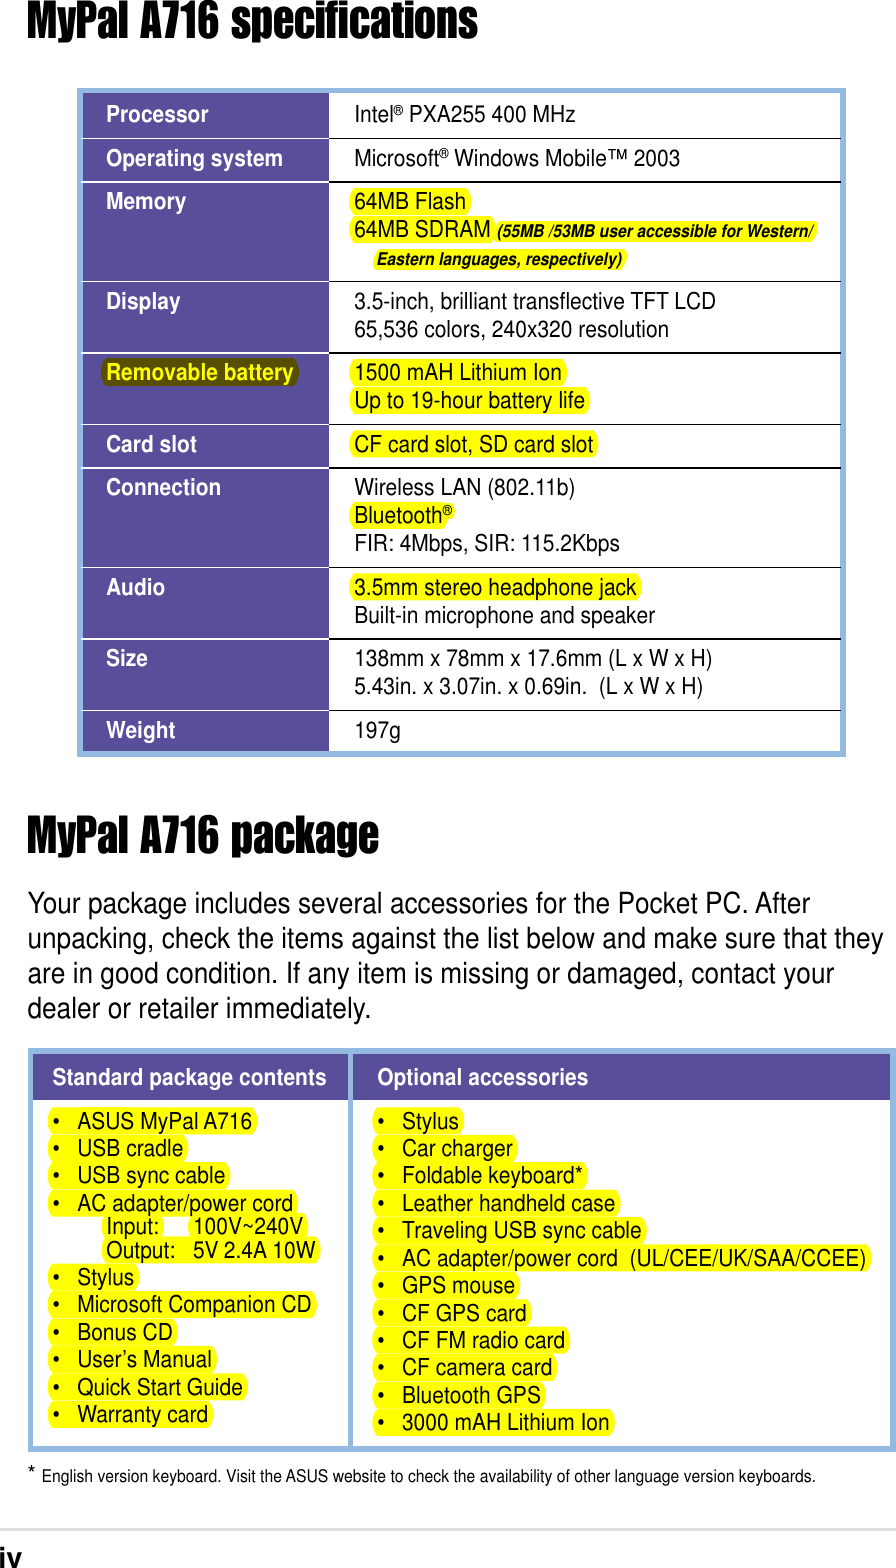 ivMyPal A716 specificationsMyPal A716 packageYour package includes several accessories for the Pocket PC. Afterunpacking, check the items against the list below and make sure that theyare in good condition. If any item is missing or damaged, contact yourdealer or retailer immediately.* English version keyboard. Visit the ASUS website to check the availability of other language version keyboards.Standard package contents• ASUS MyPal A716• USB cradle• USB sync cable• AC adapter/power cord     Input: 100V~240V     Output: 5V 2.4A 10W• Stylus• Microsoft Companion CD• Bonus CD• User’s Manual• Quick Start Guide• Warranty cardOptional accessories• Stylus• Car charger• Foldable keyboard*• Leather handheld case• Traveling USB sync cable• AC adapter/power cord  (UL/CEE/UK/SAA/CCEE)• GPS mouse• CF GPS card• CF FM radio card• CF camera card• Bluetooth GPS• 3000 mAH Lithium IonProcessorOperating systemMemoryDisplayRemovable batteryCard slotConnectionAudioSizeWeightIntel® PXA255 400 MHzMicrosoft® Windows Mobile™ 200364MB Flash64MB SDRAM (55MB /53MB user accessible for Western/     Eastern languages, respectively)3.5-inch, brilliant transflective TFT LCD65,536 colors, 240x320 resolution1500 mAH Lithium IonUp to 19-hour battery lifeCF card slot, SD card slotWireless LAN (802.11b)Bluetooth®FIR: 4Mbps, SIR: 115.2Kbps3.5mm stereo headphone jackBuilt-in microphone and speaker138mm x 78mm x 17.6mm (L x W x H)5.43in. x 3.07in. x 0.69in.  (L x W x H)197g